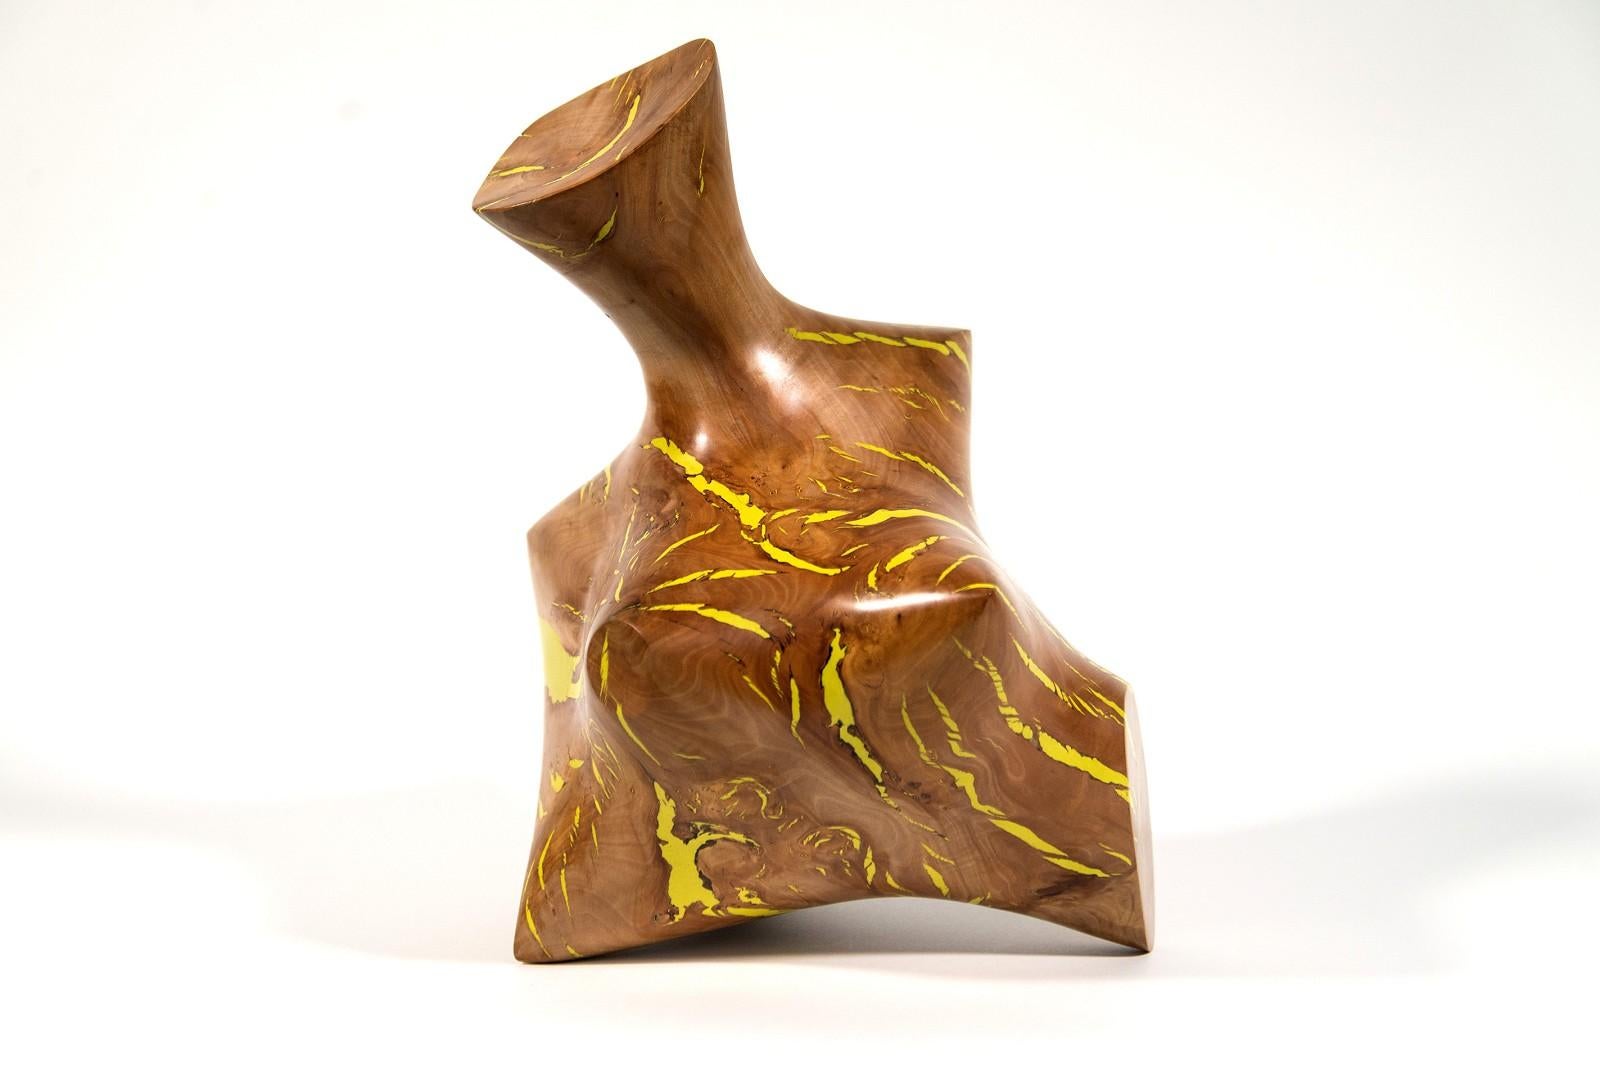 Windfall Series II No 1 - smooth, carved, abstract, Applewood & resin sculpture